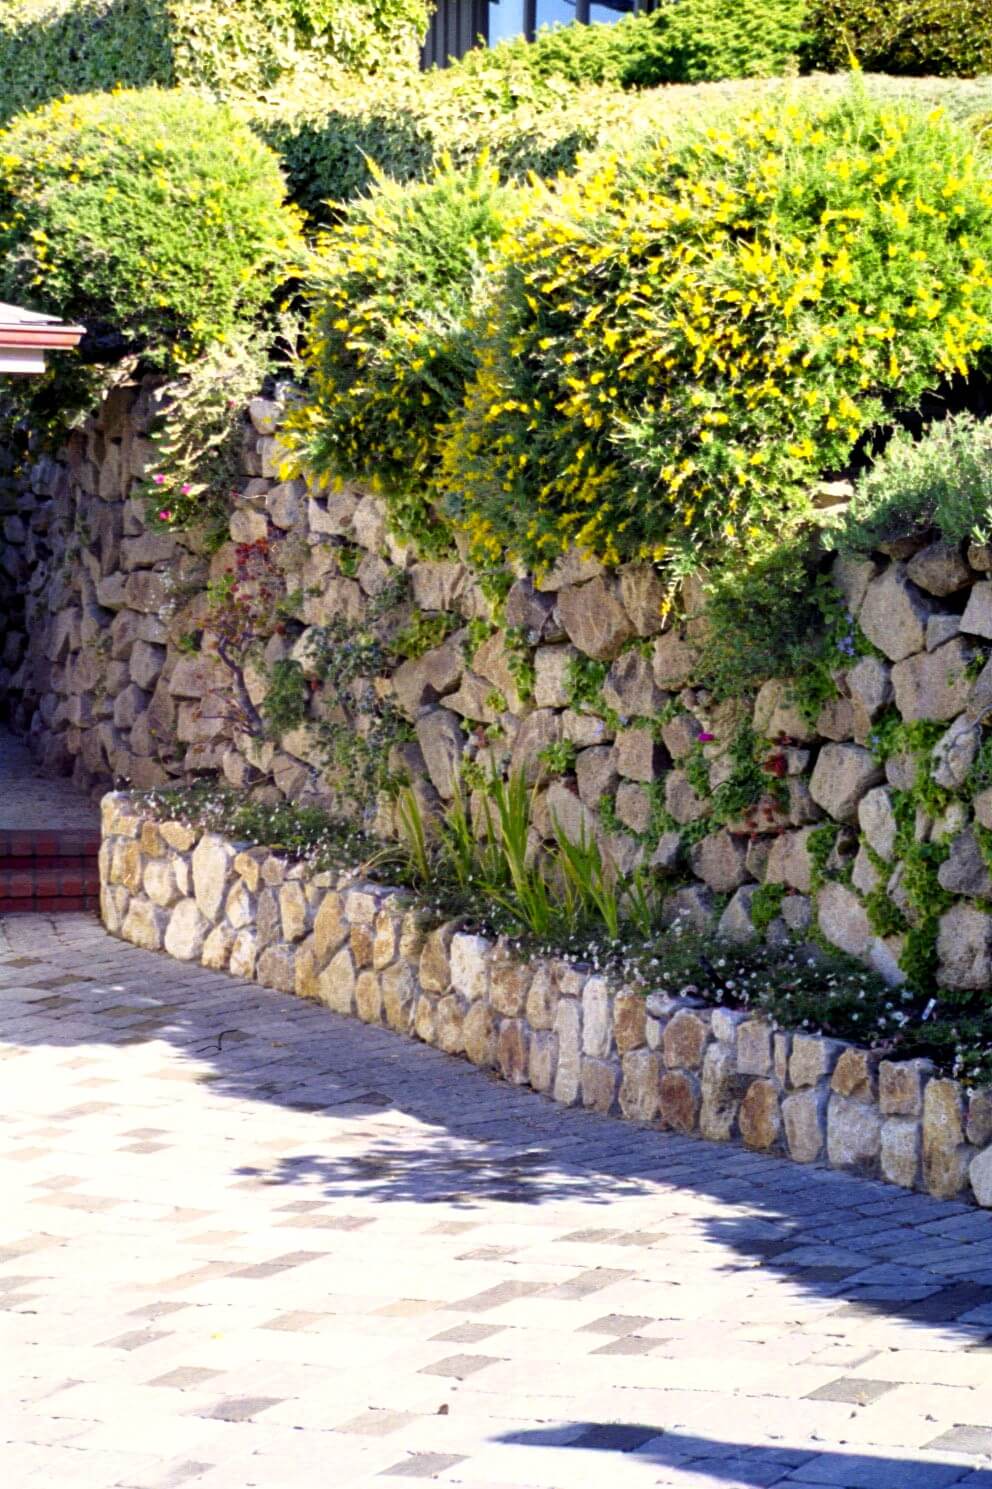 Irregular stone stacked retaining wall with ornamental plantings growing in the wall and behind it